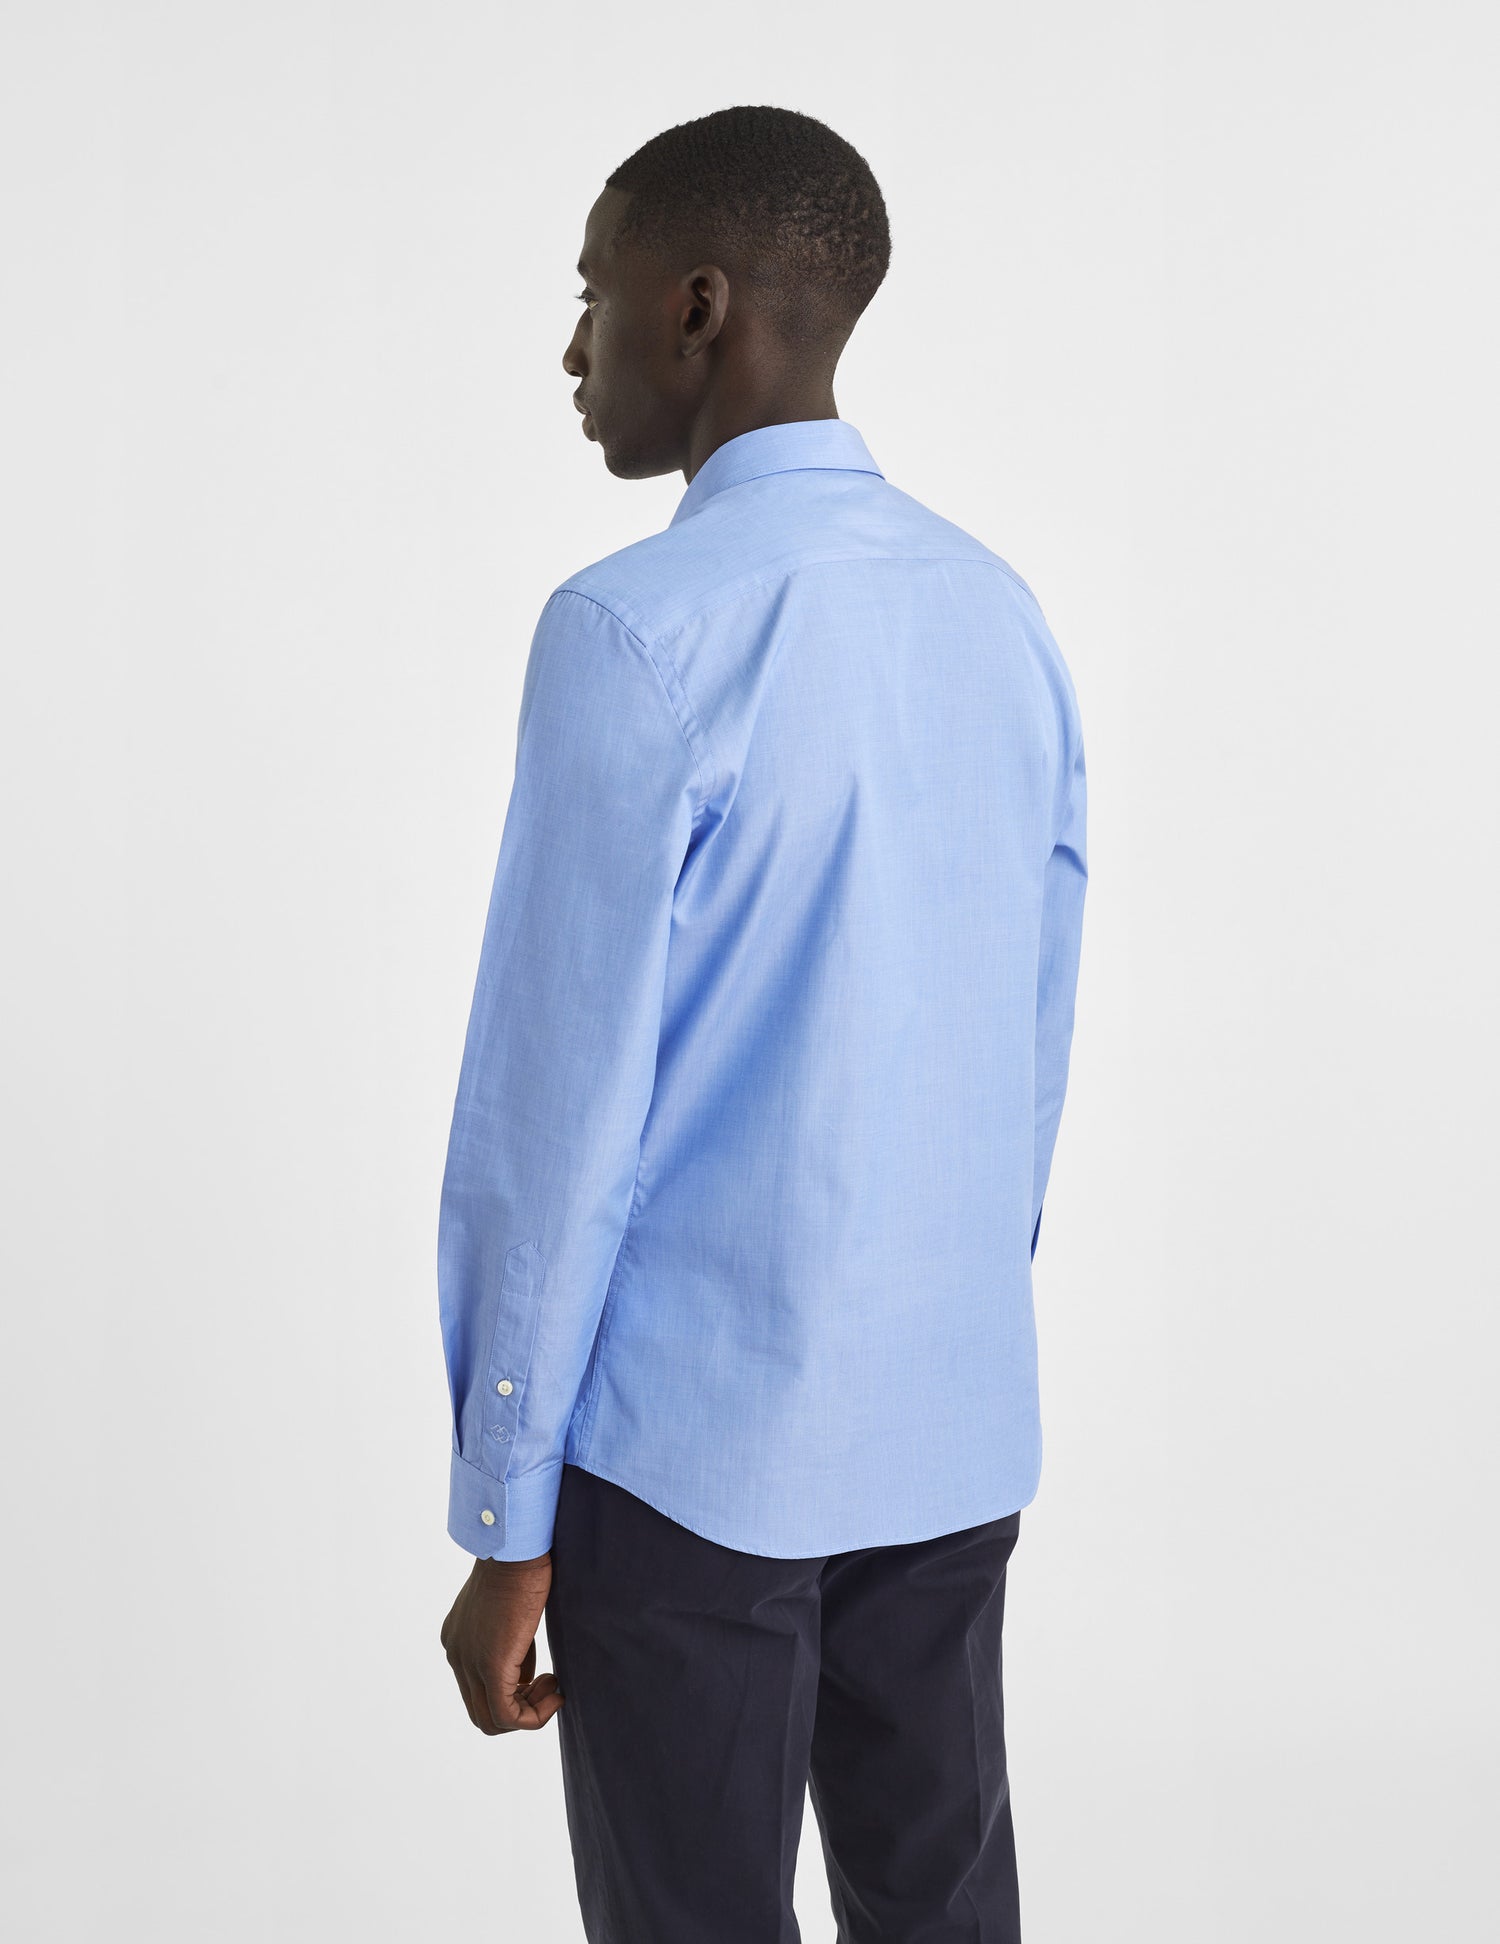 Fitted blue shirt - Wire to wire - Figaret Collar#4